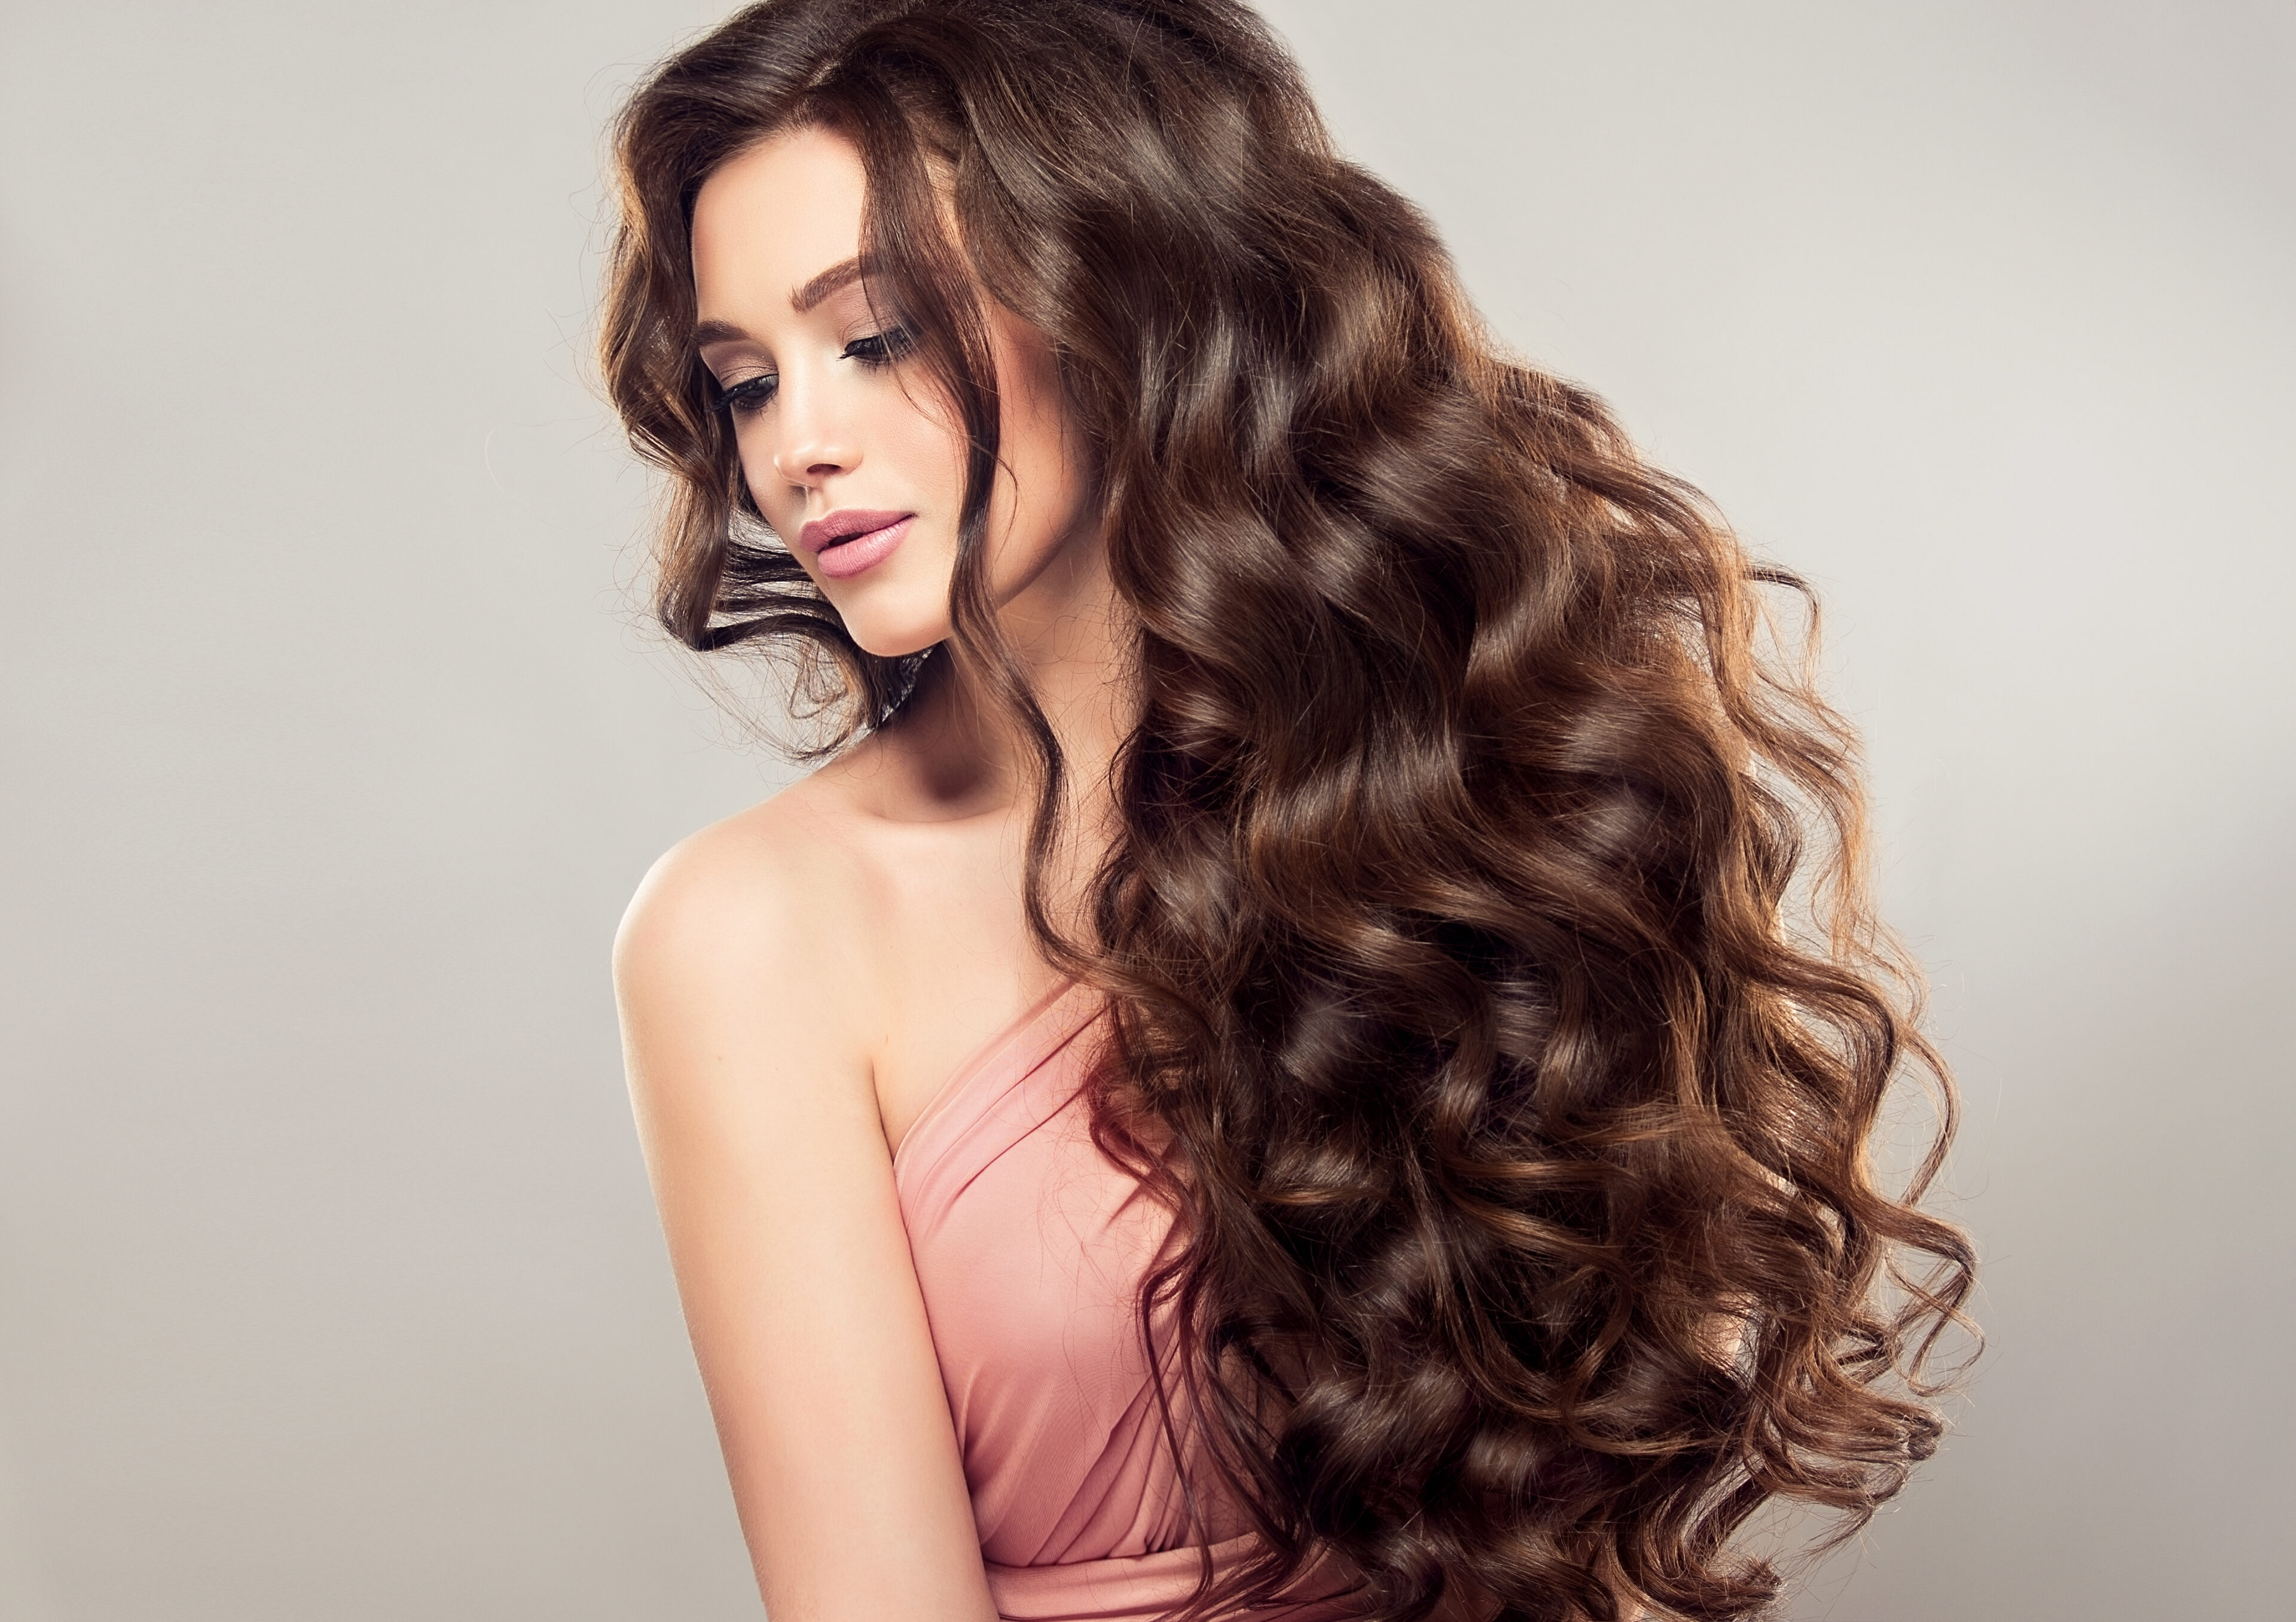 Volume and shine perm care tips